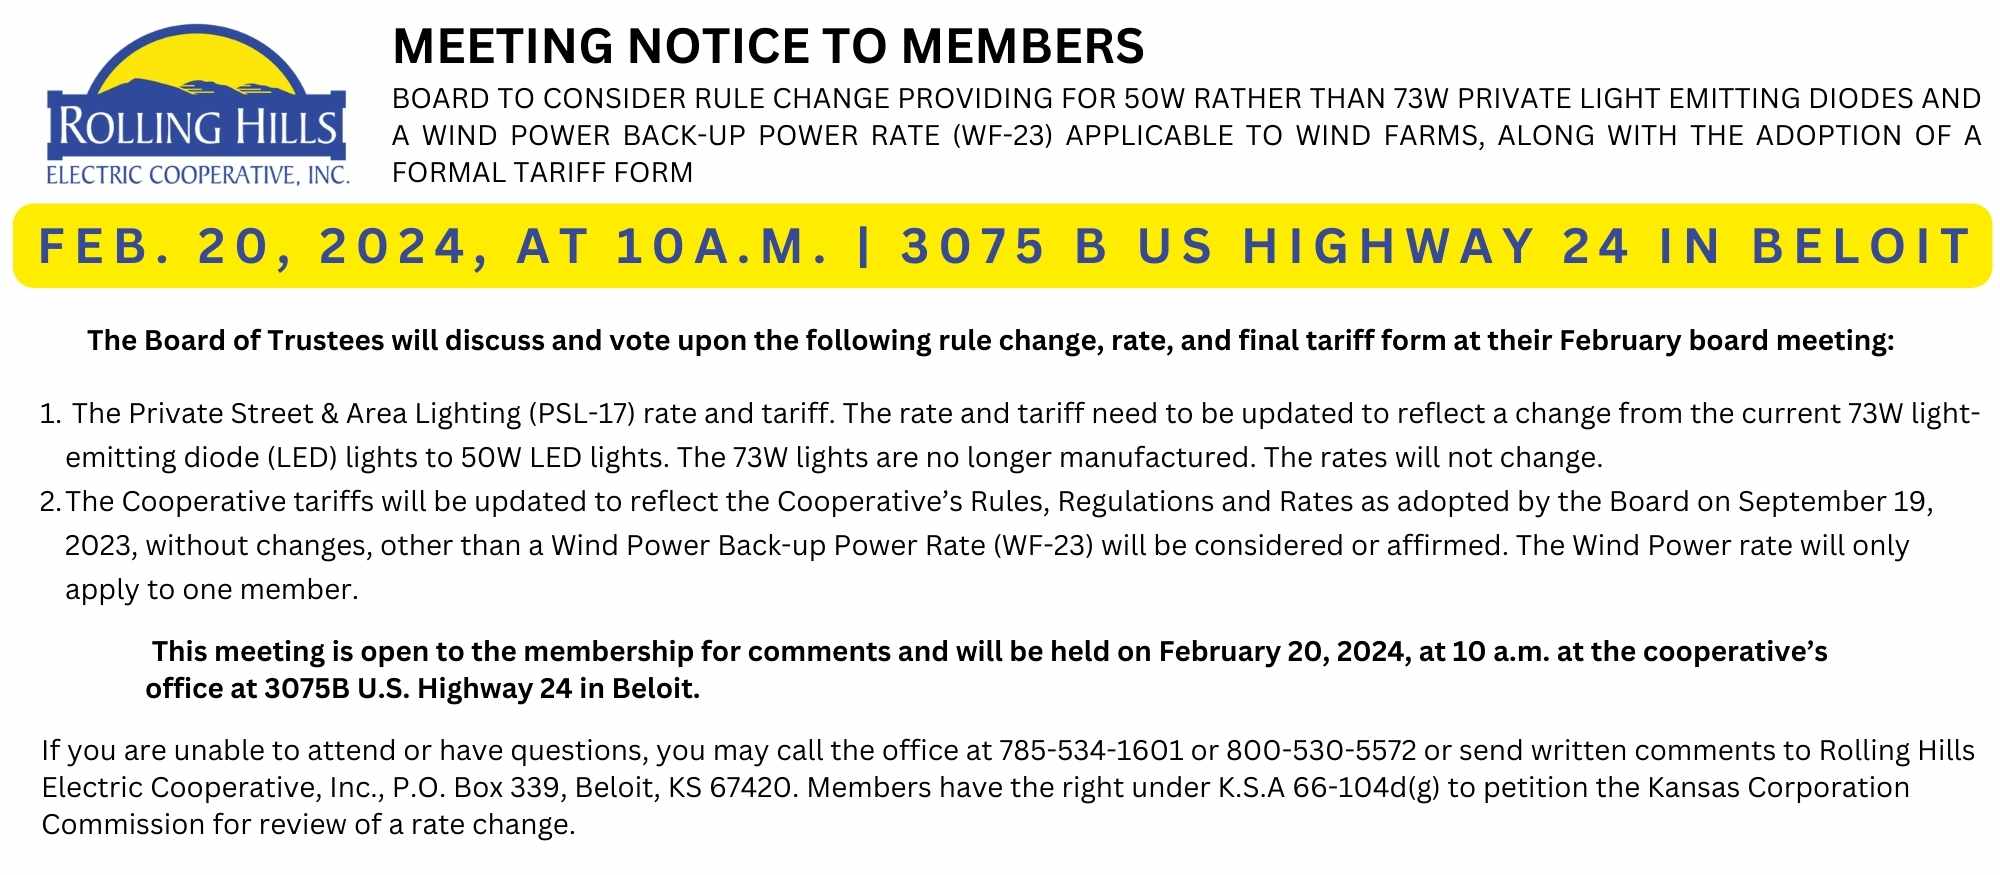 Meeting Notice for Rates and Tariffs in February 2024